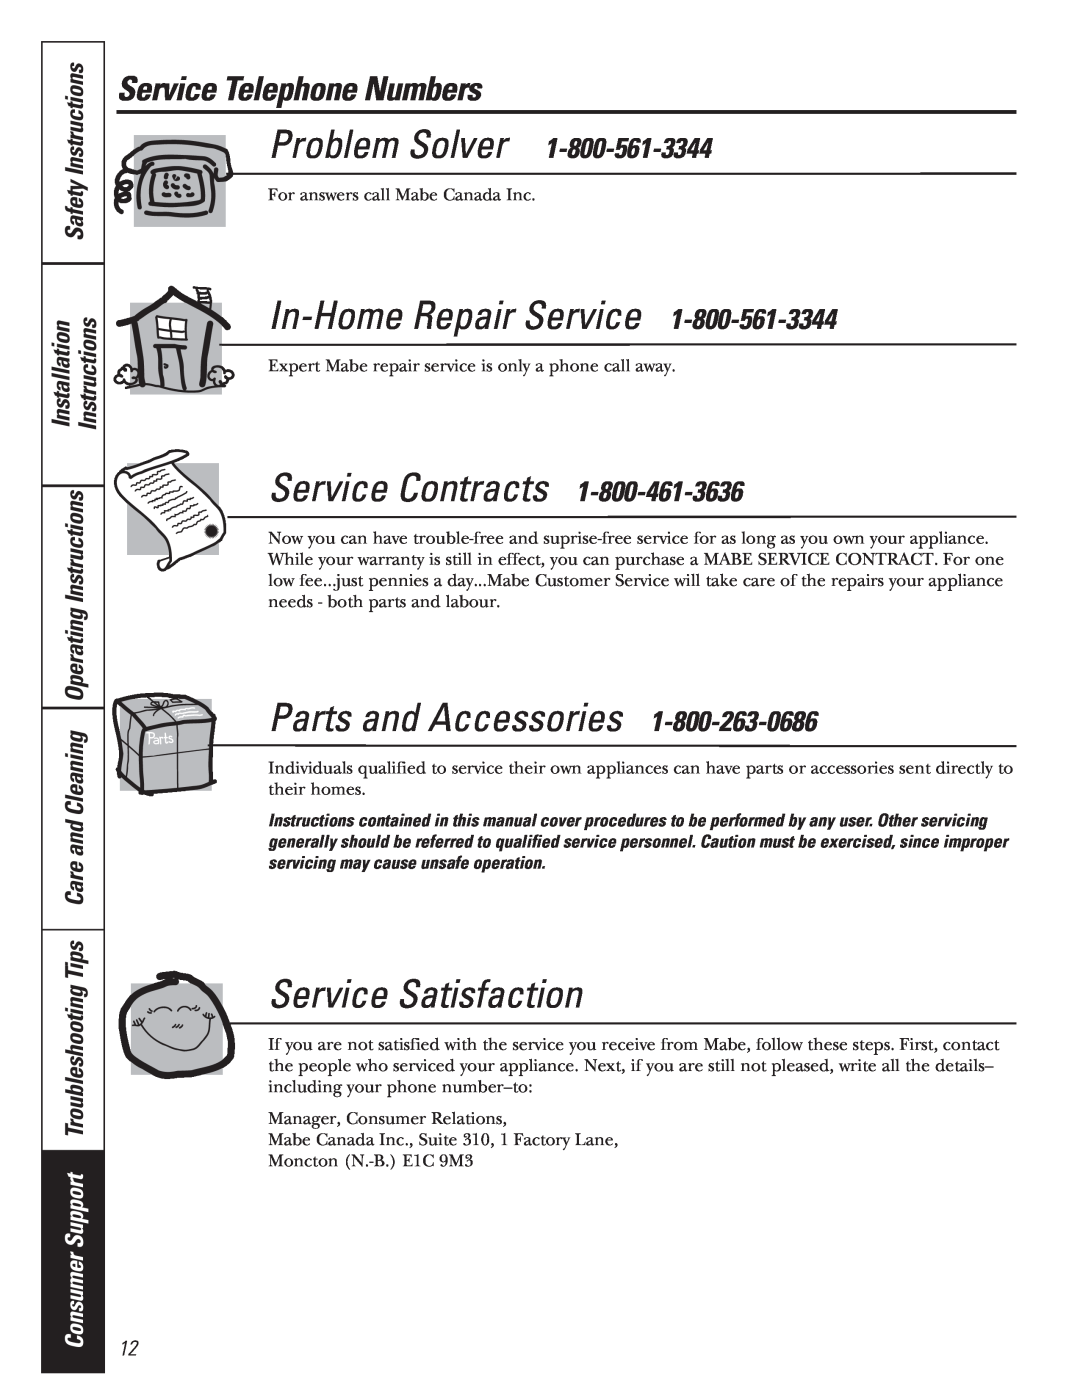 Mabe Canada GWS04 Service Telephone Numbers, Problem Solver, In-Home Repair Service, Service Contracts, Installation 